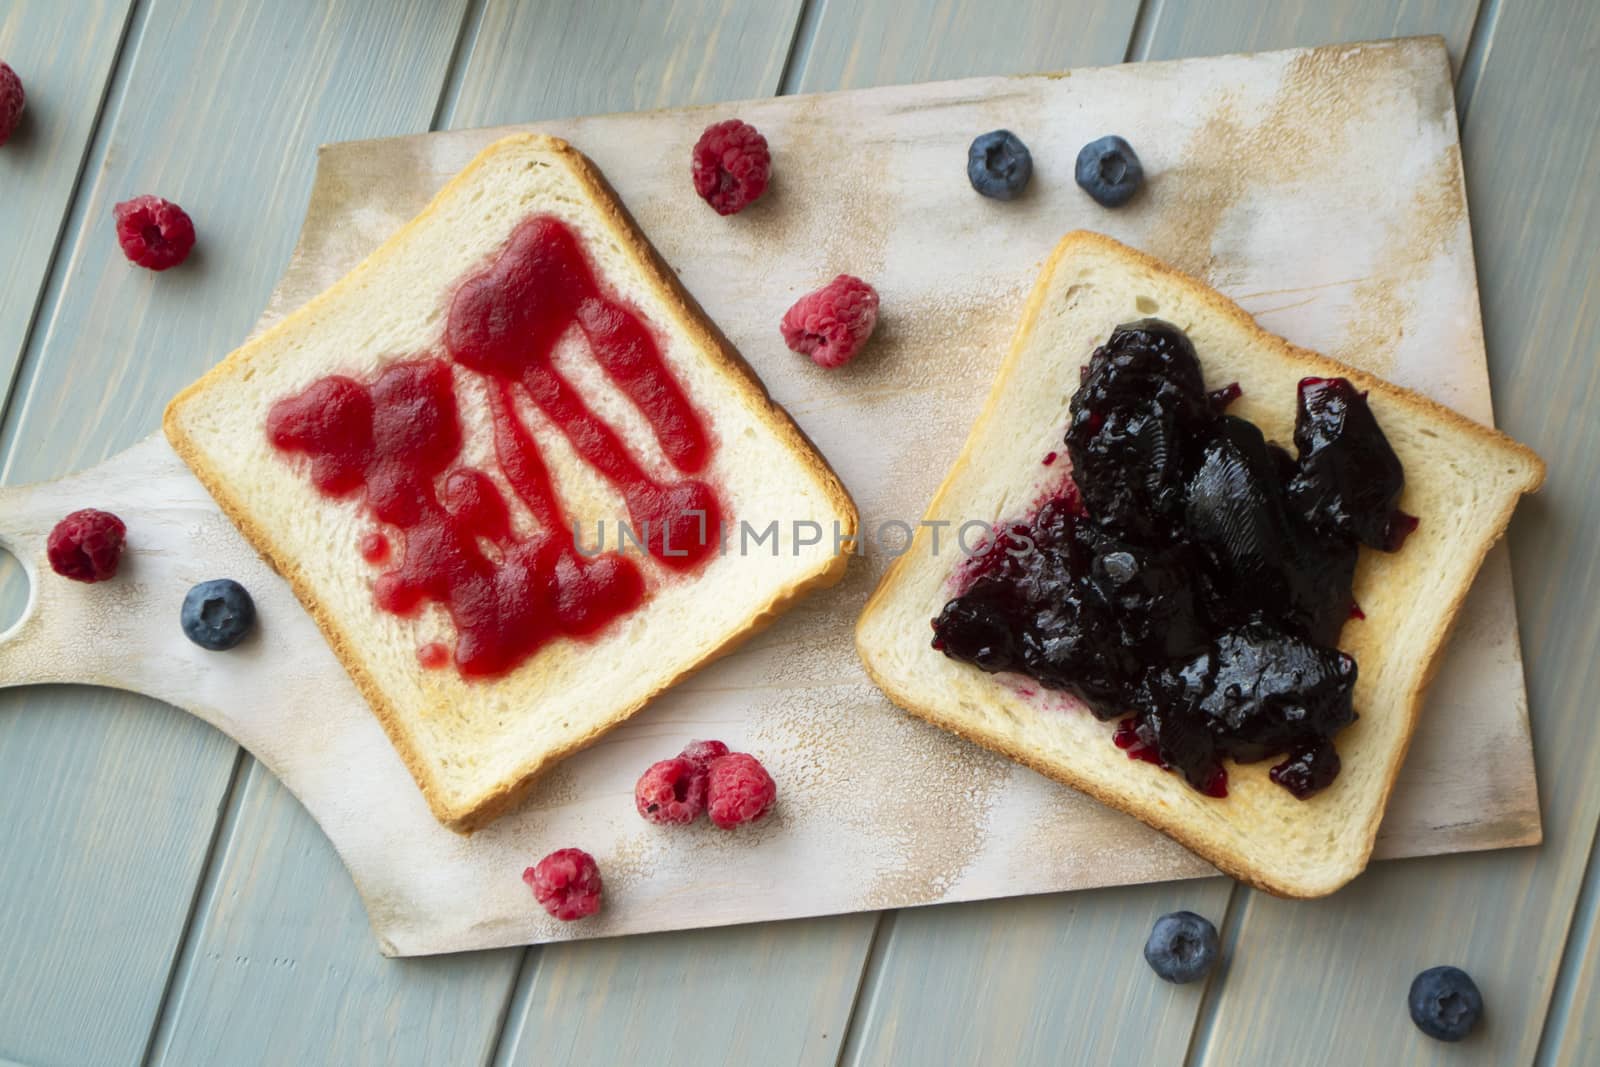 homemade confiture with fresh fruits from garden, rustic decoration. Fruit jam on toasted bread. Flat lay